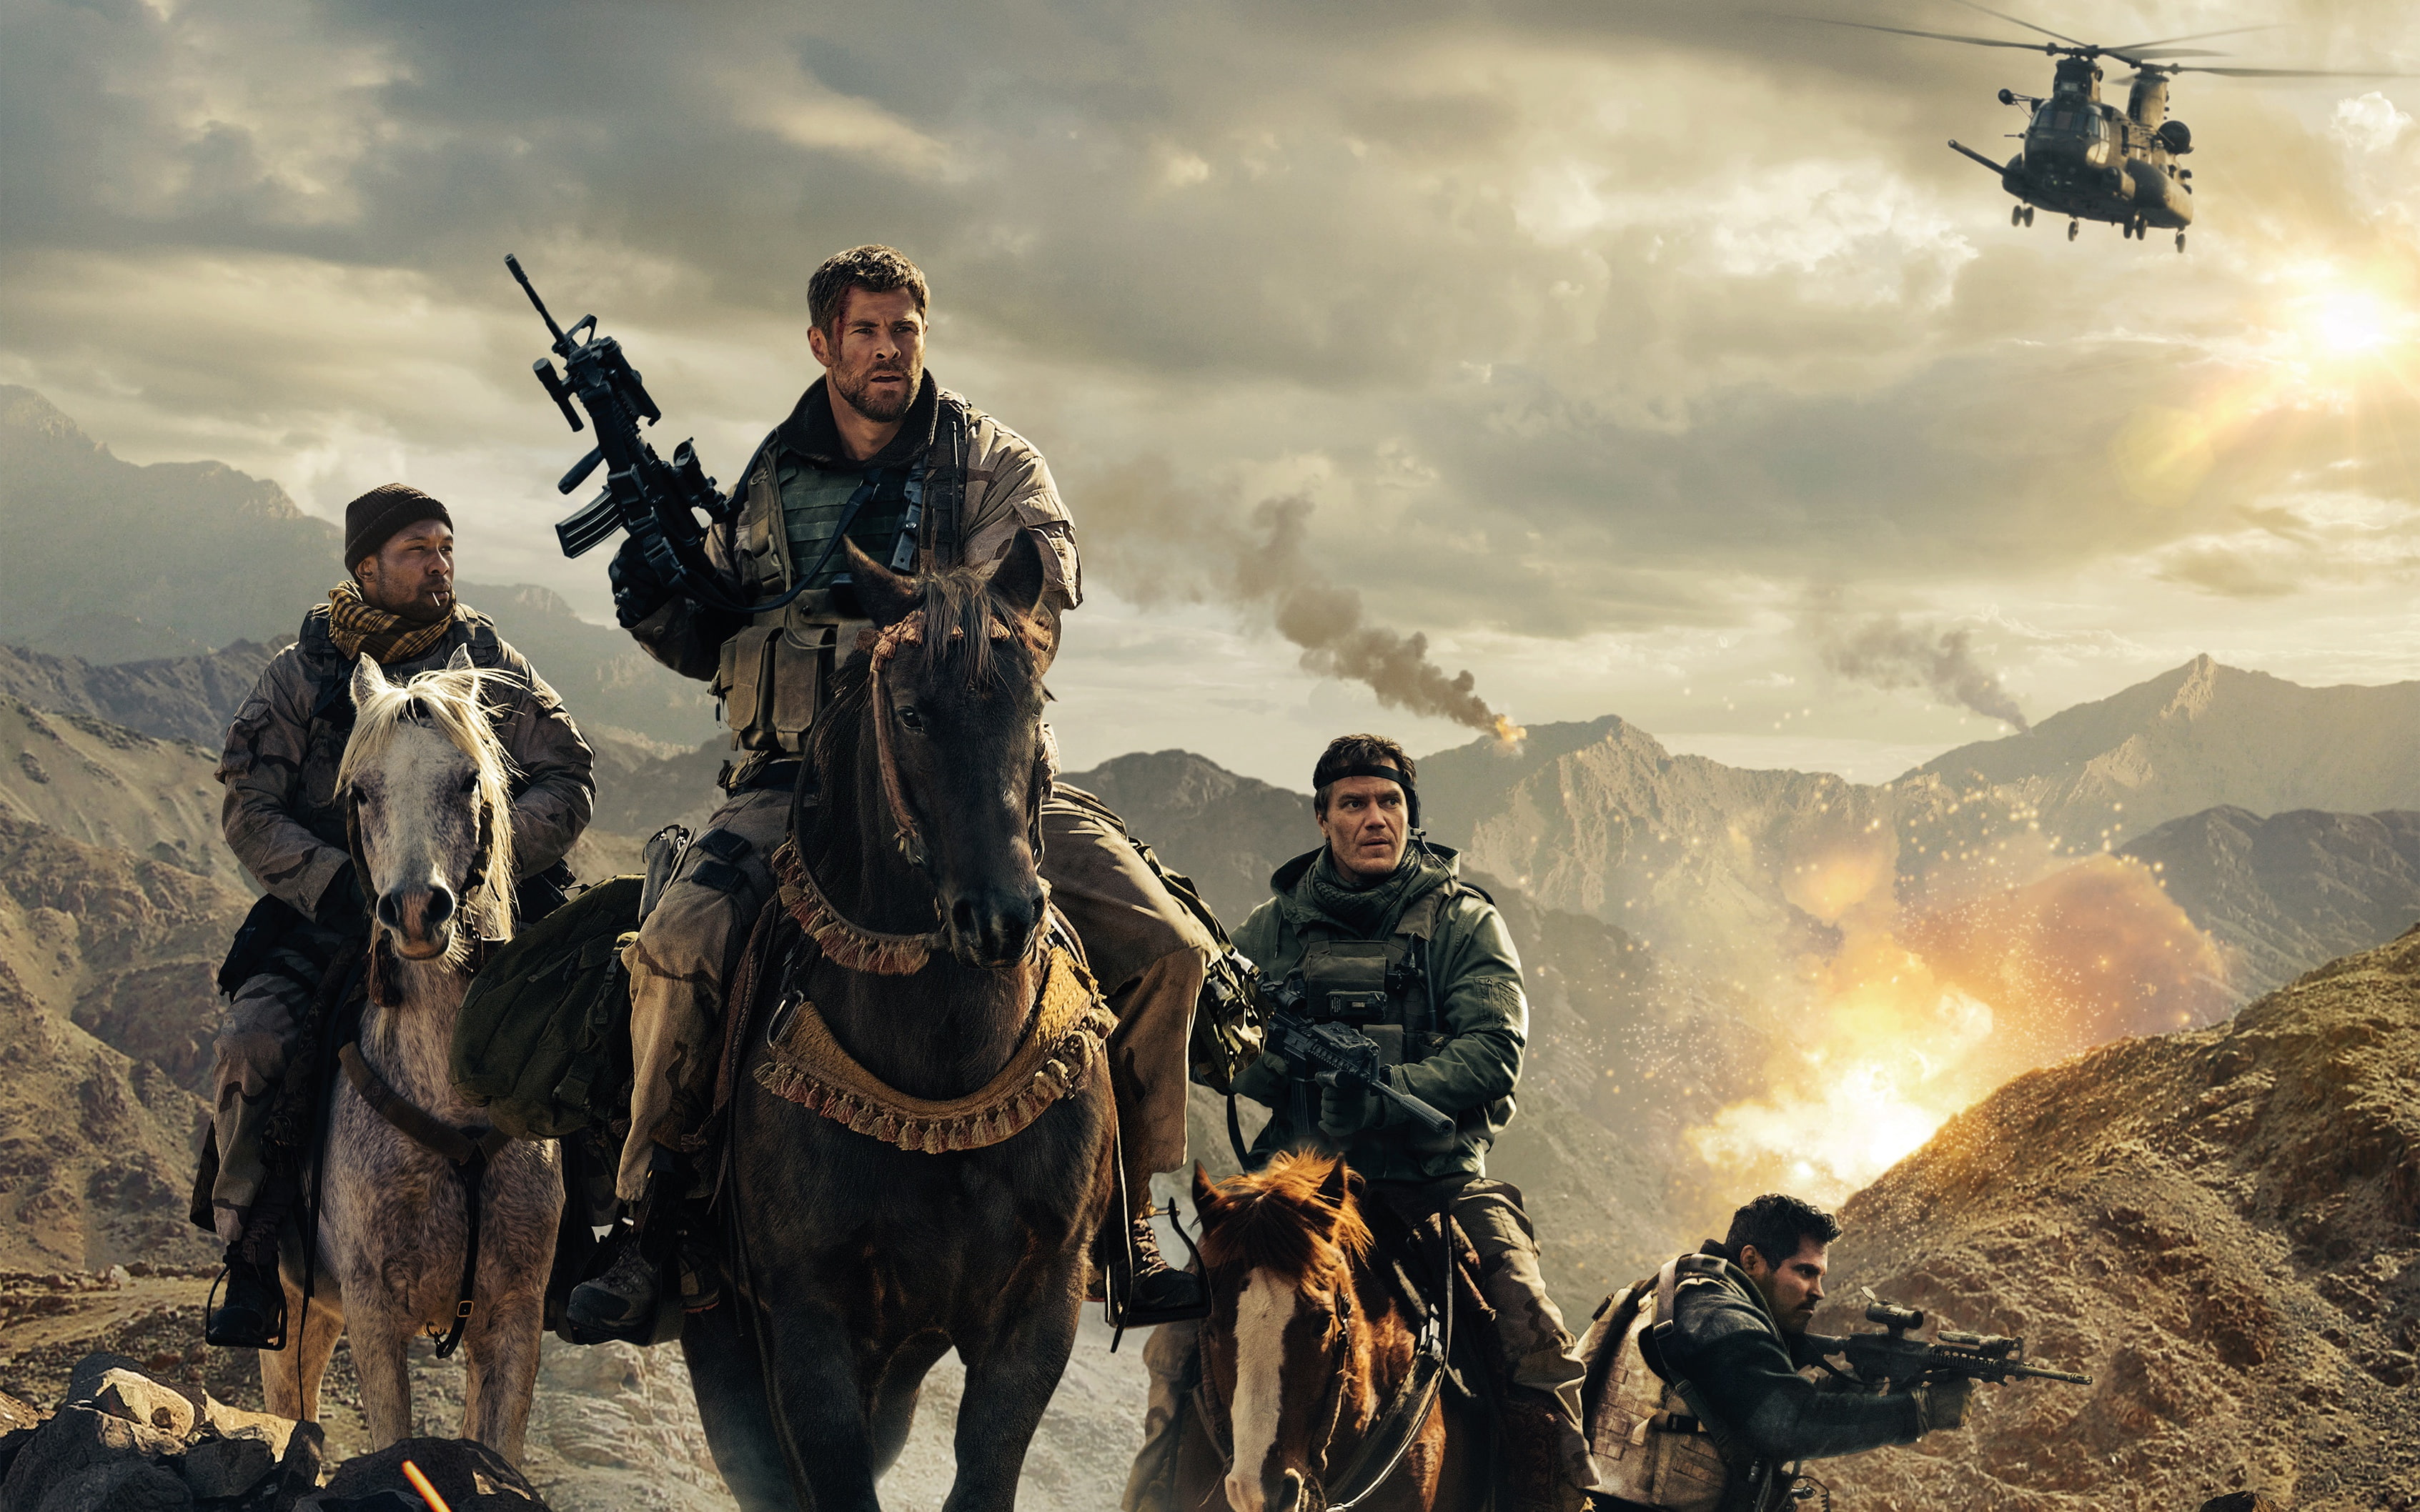 mountains, weapons, helicopter, riders, action, poster, Chris Hemsworth